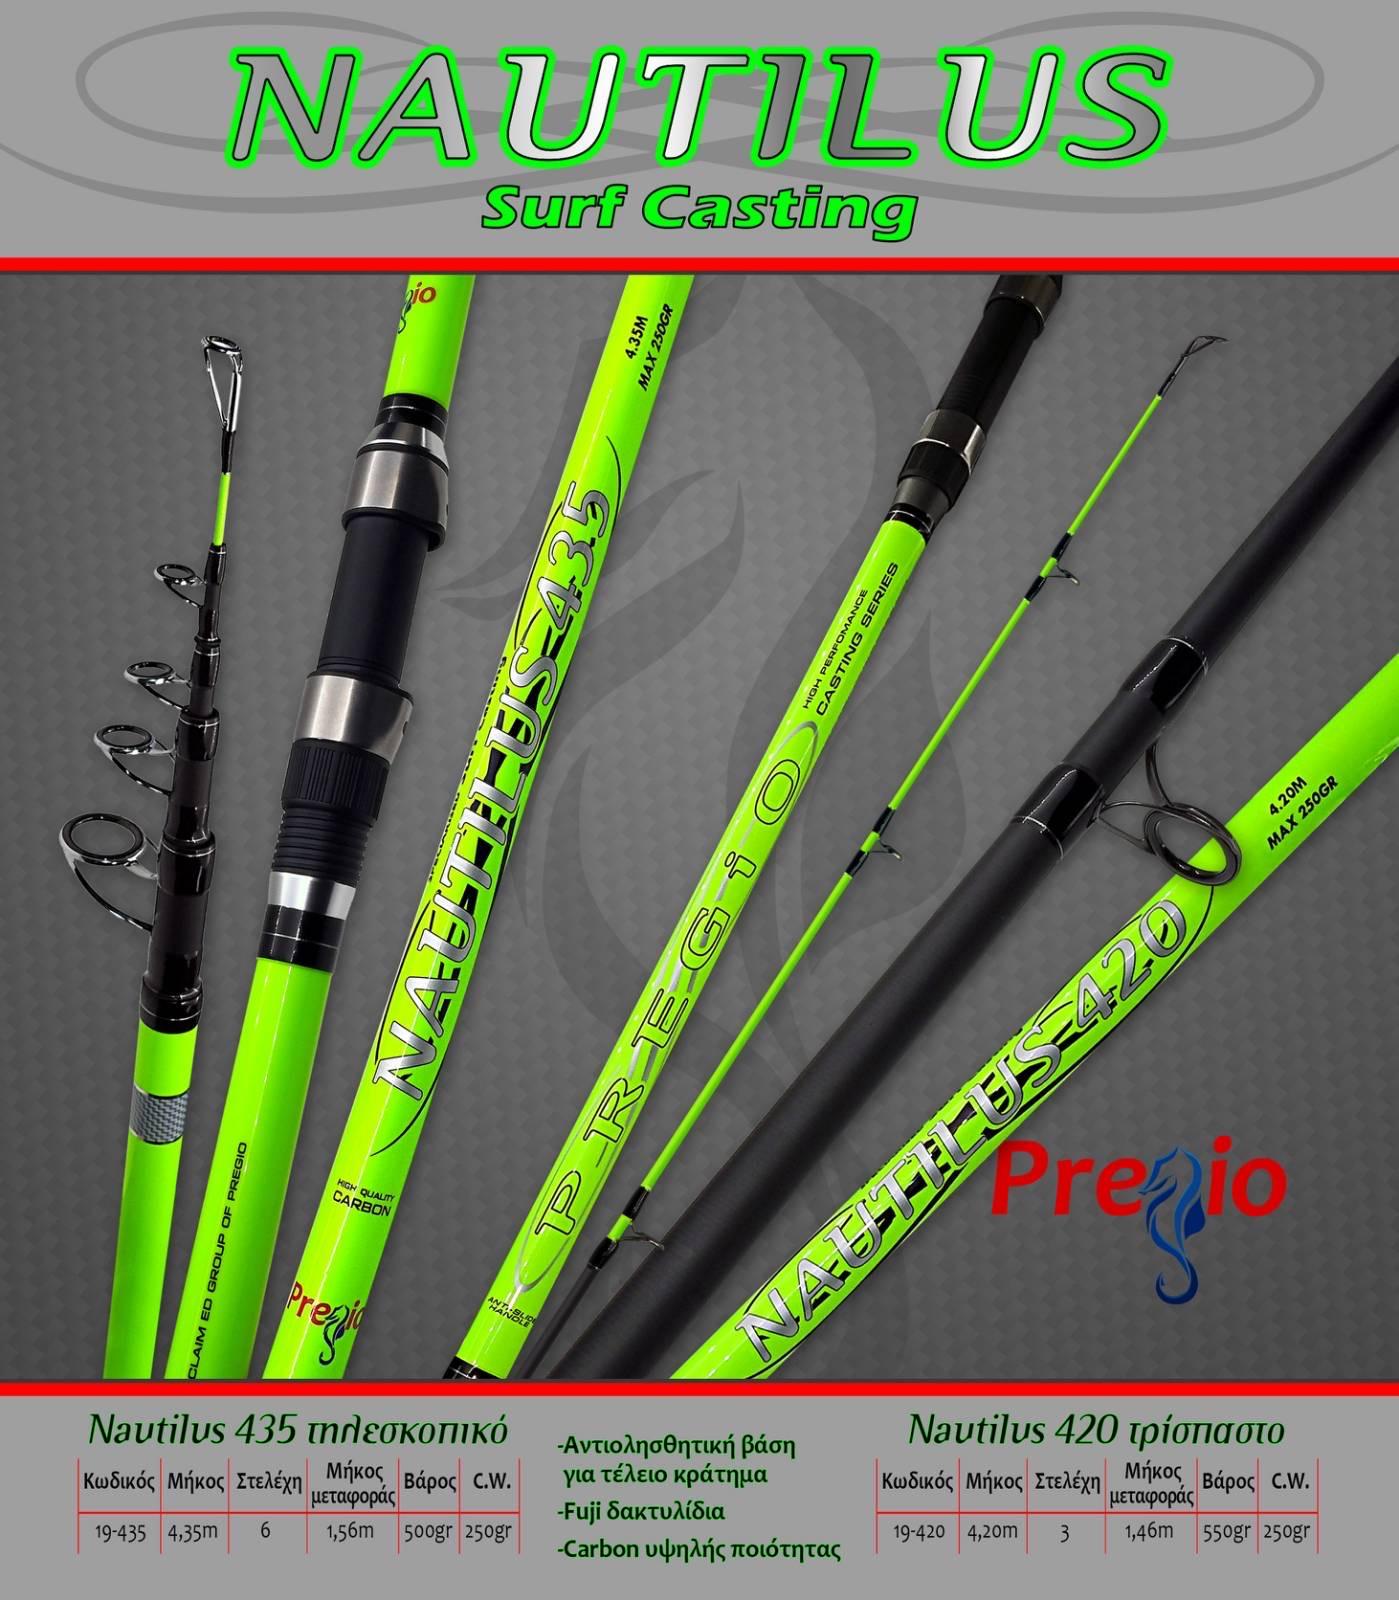 Fishing Rods - Fishing Rods for Shore - Surf Casting - Surf Casting Fishing  Rod Pregio Nautilus 420 19-420